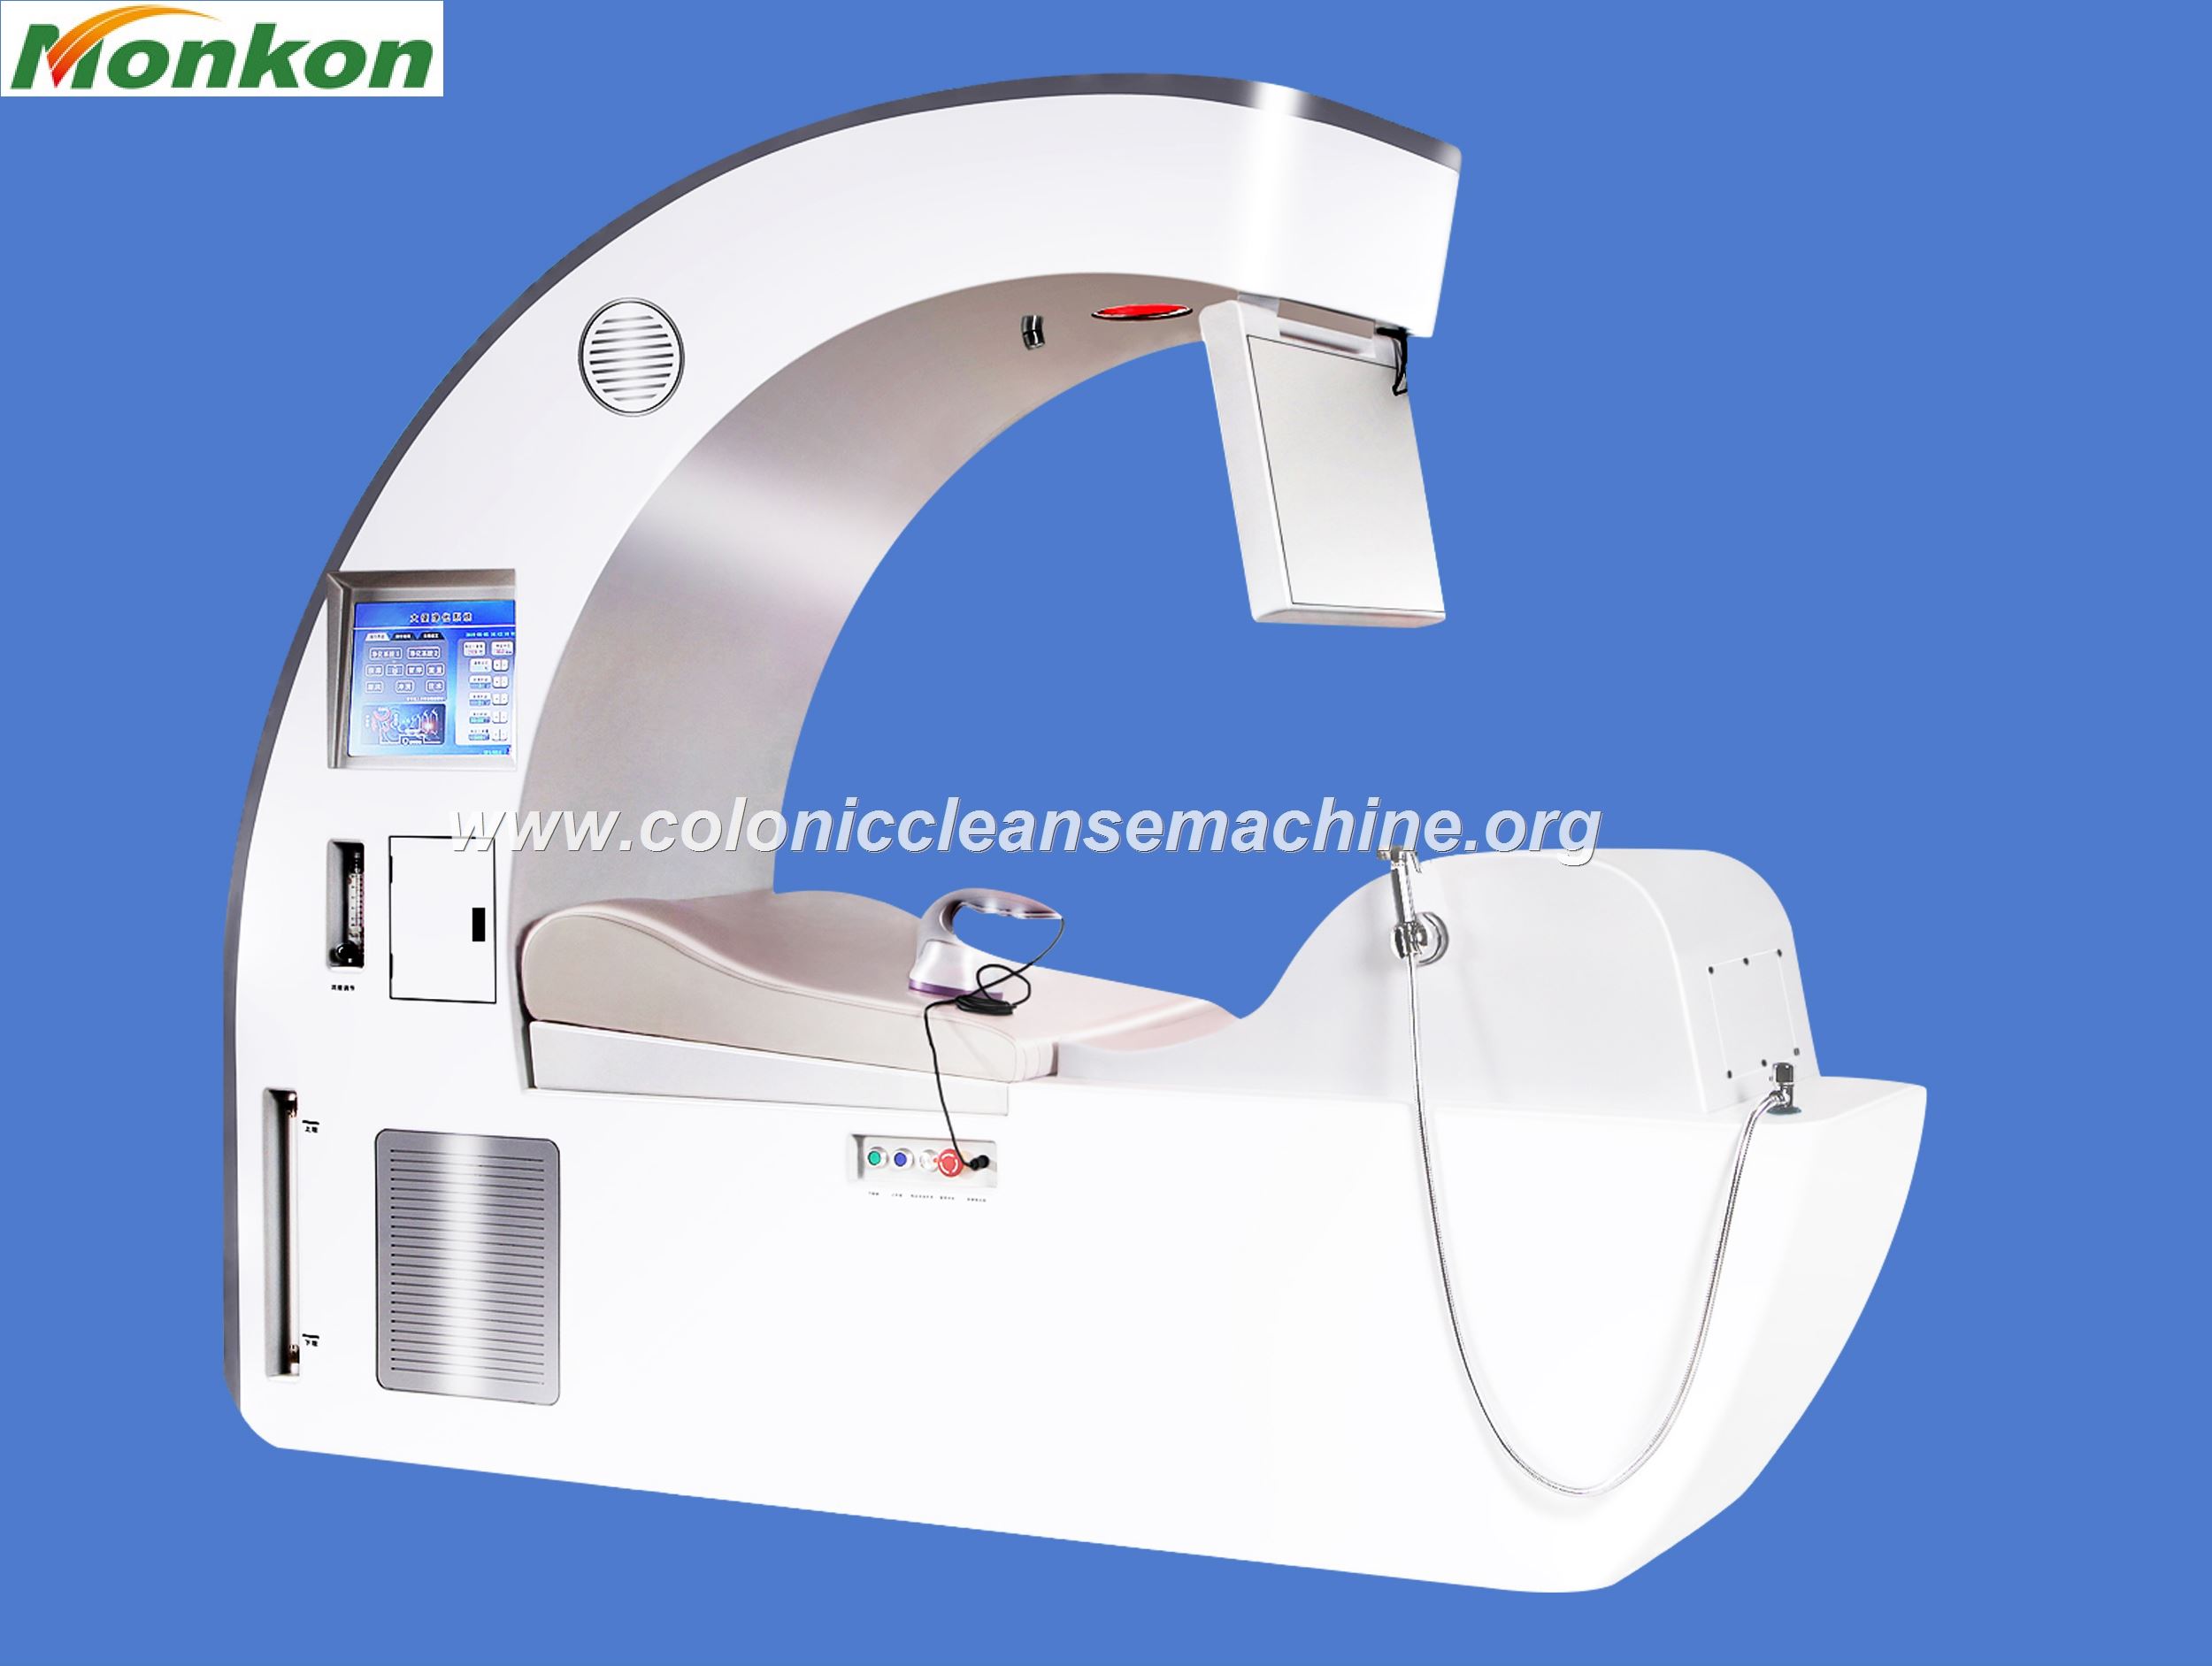 Colon Flush Machine and How It Works